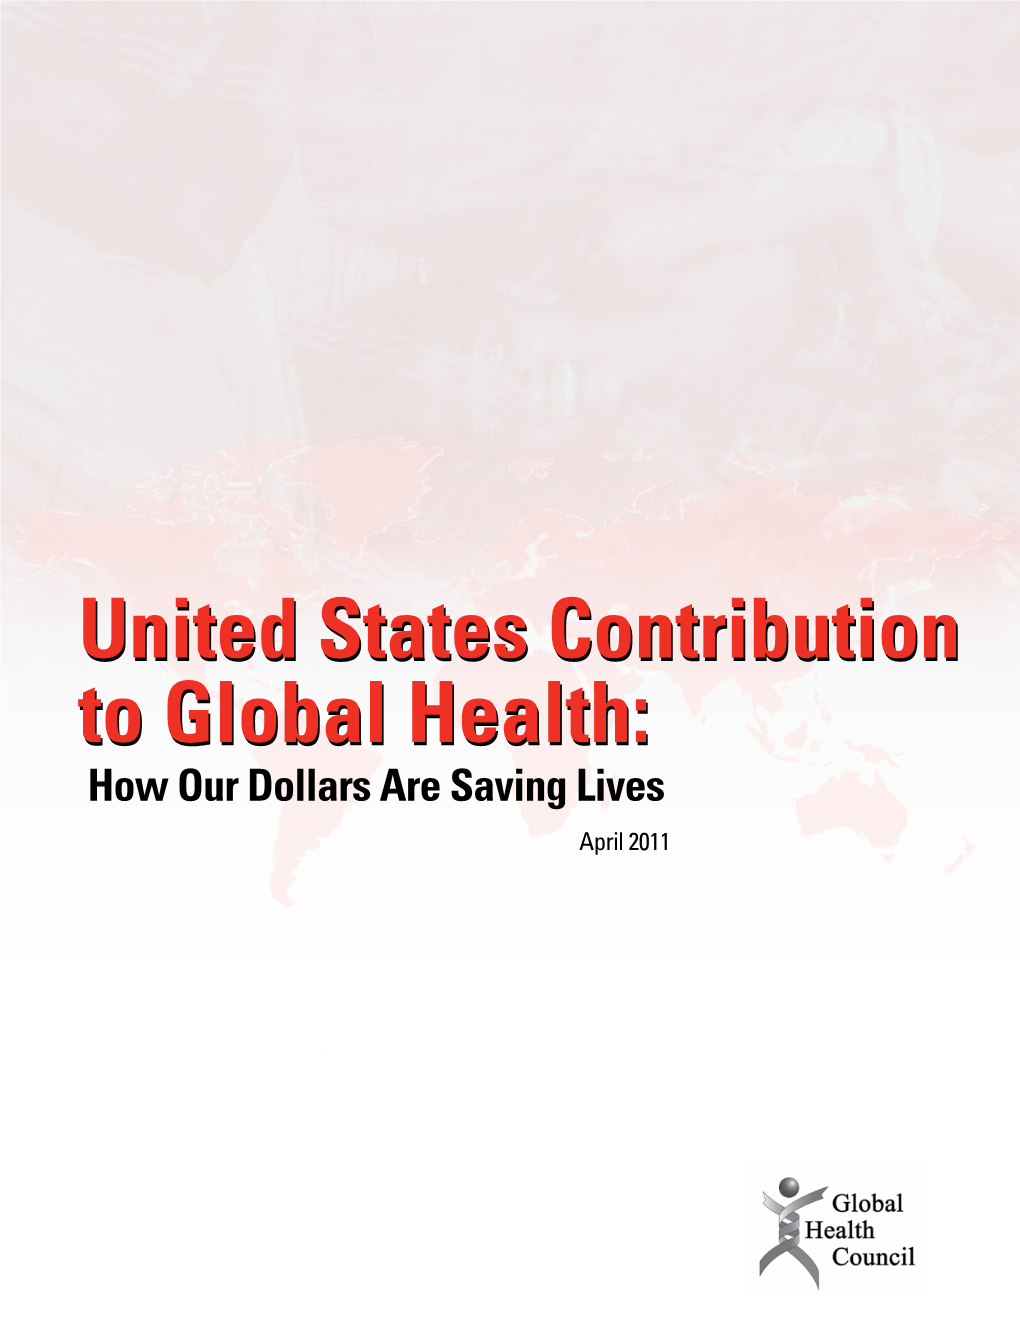 United States Contribution to Global Health: How Our Dollars Are Saving Lives April 2011